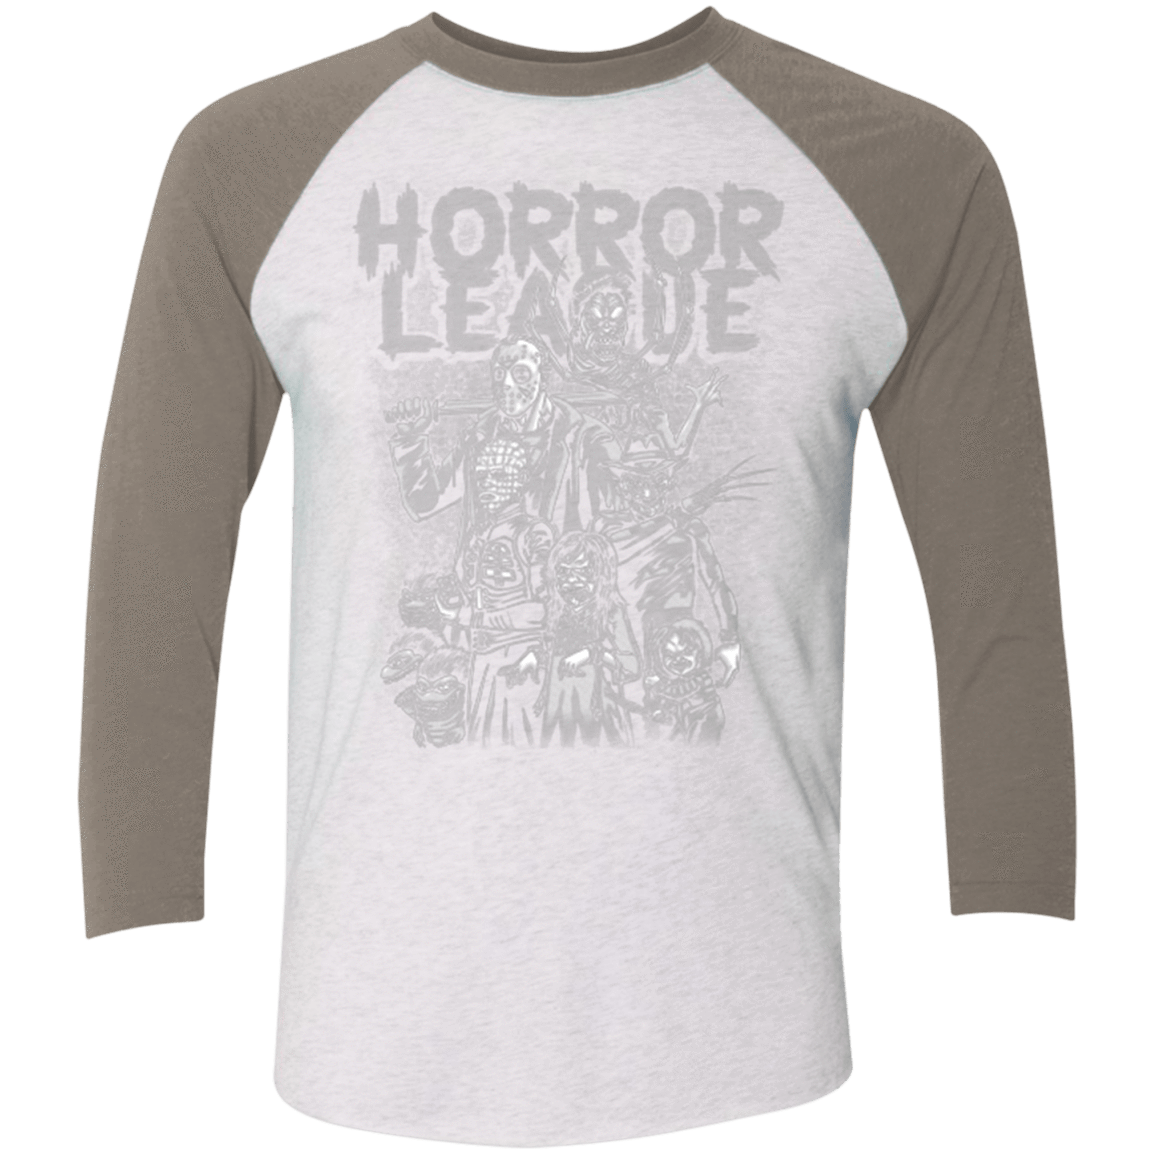 T-Shirts Heather White/Vintage Grey / X-Small Horror League Men's Triblend 3/4 Sleeve